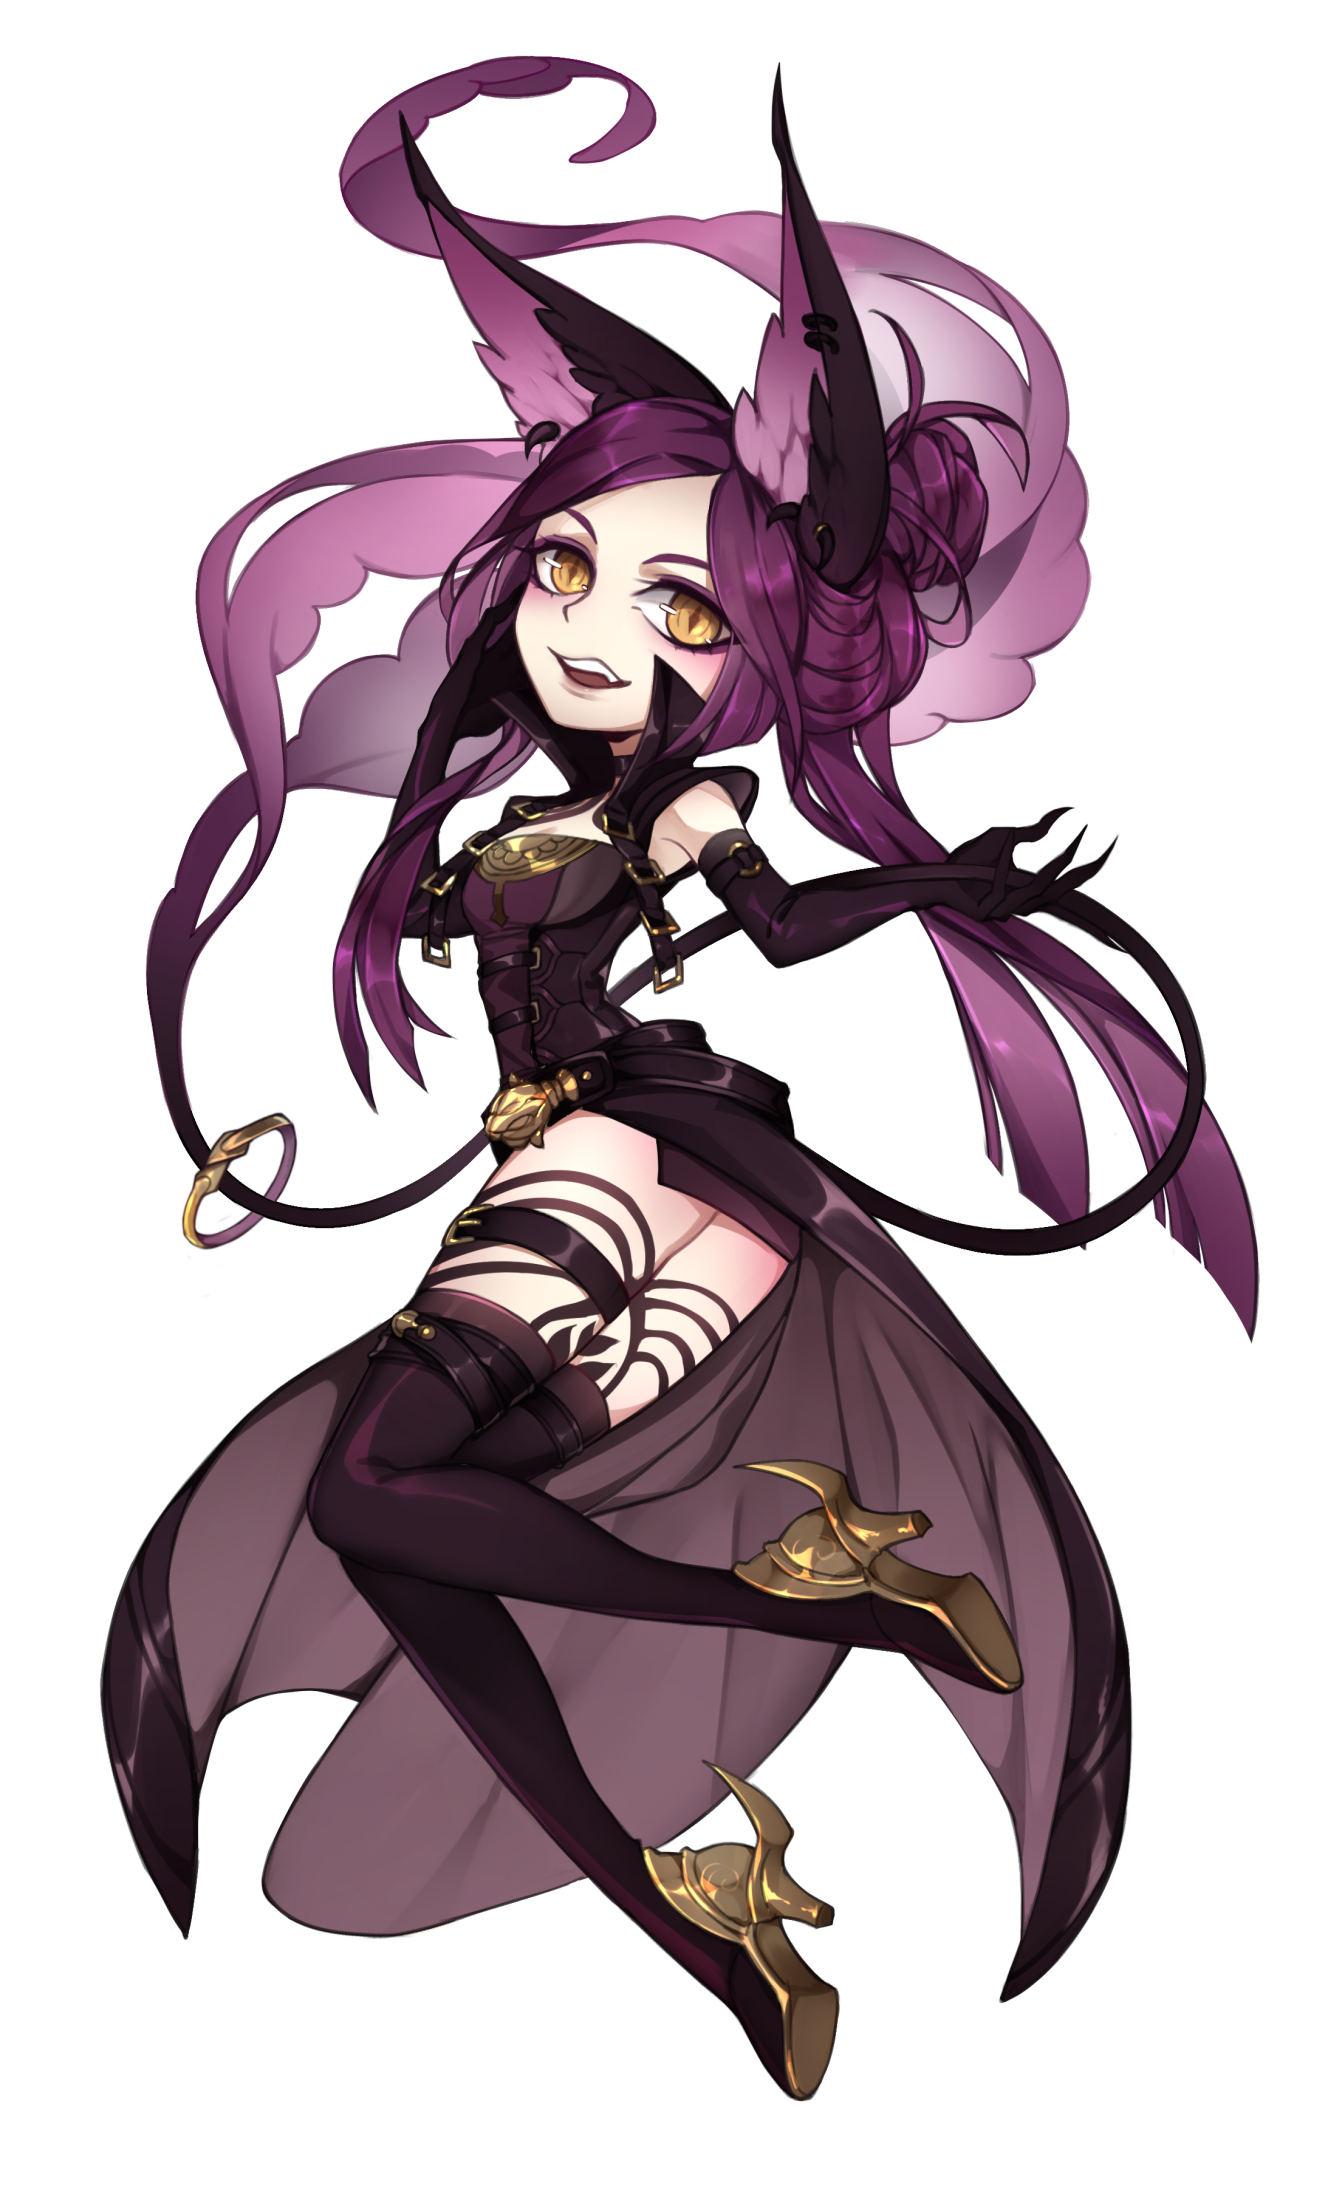 24_hours_chibi_by_viinyls-dcotsgo.png